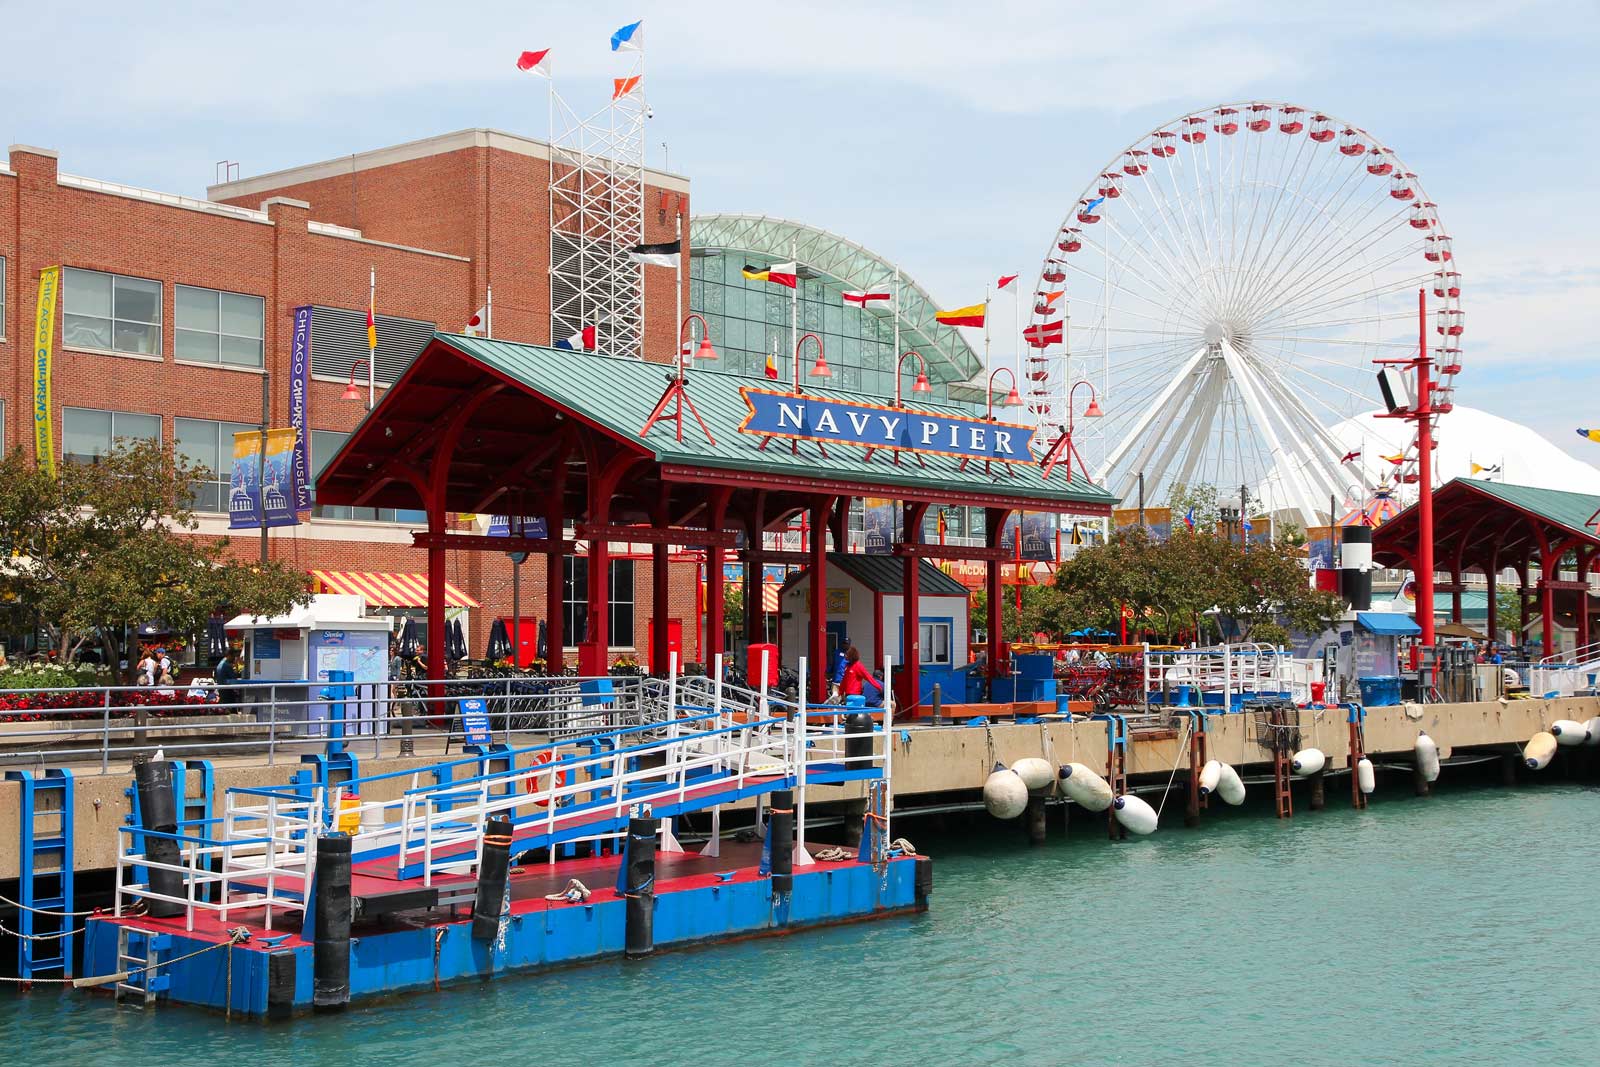 where to stay in chicago River North near the Navy Pier